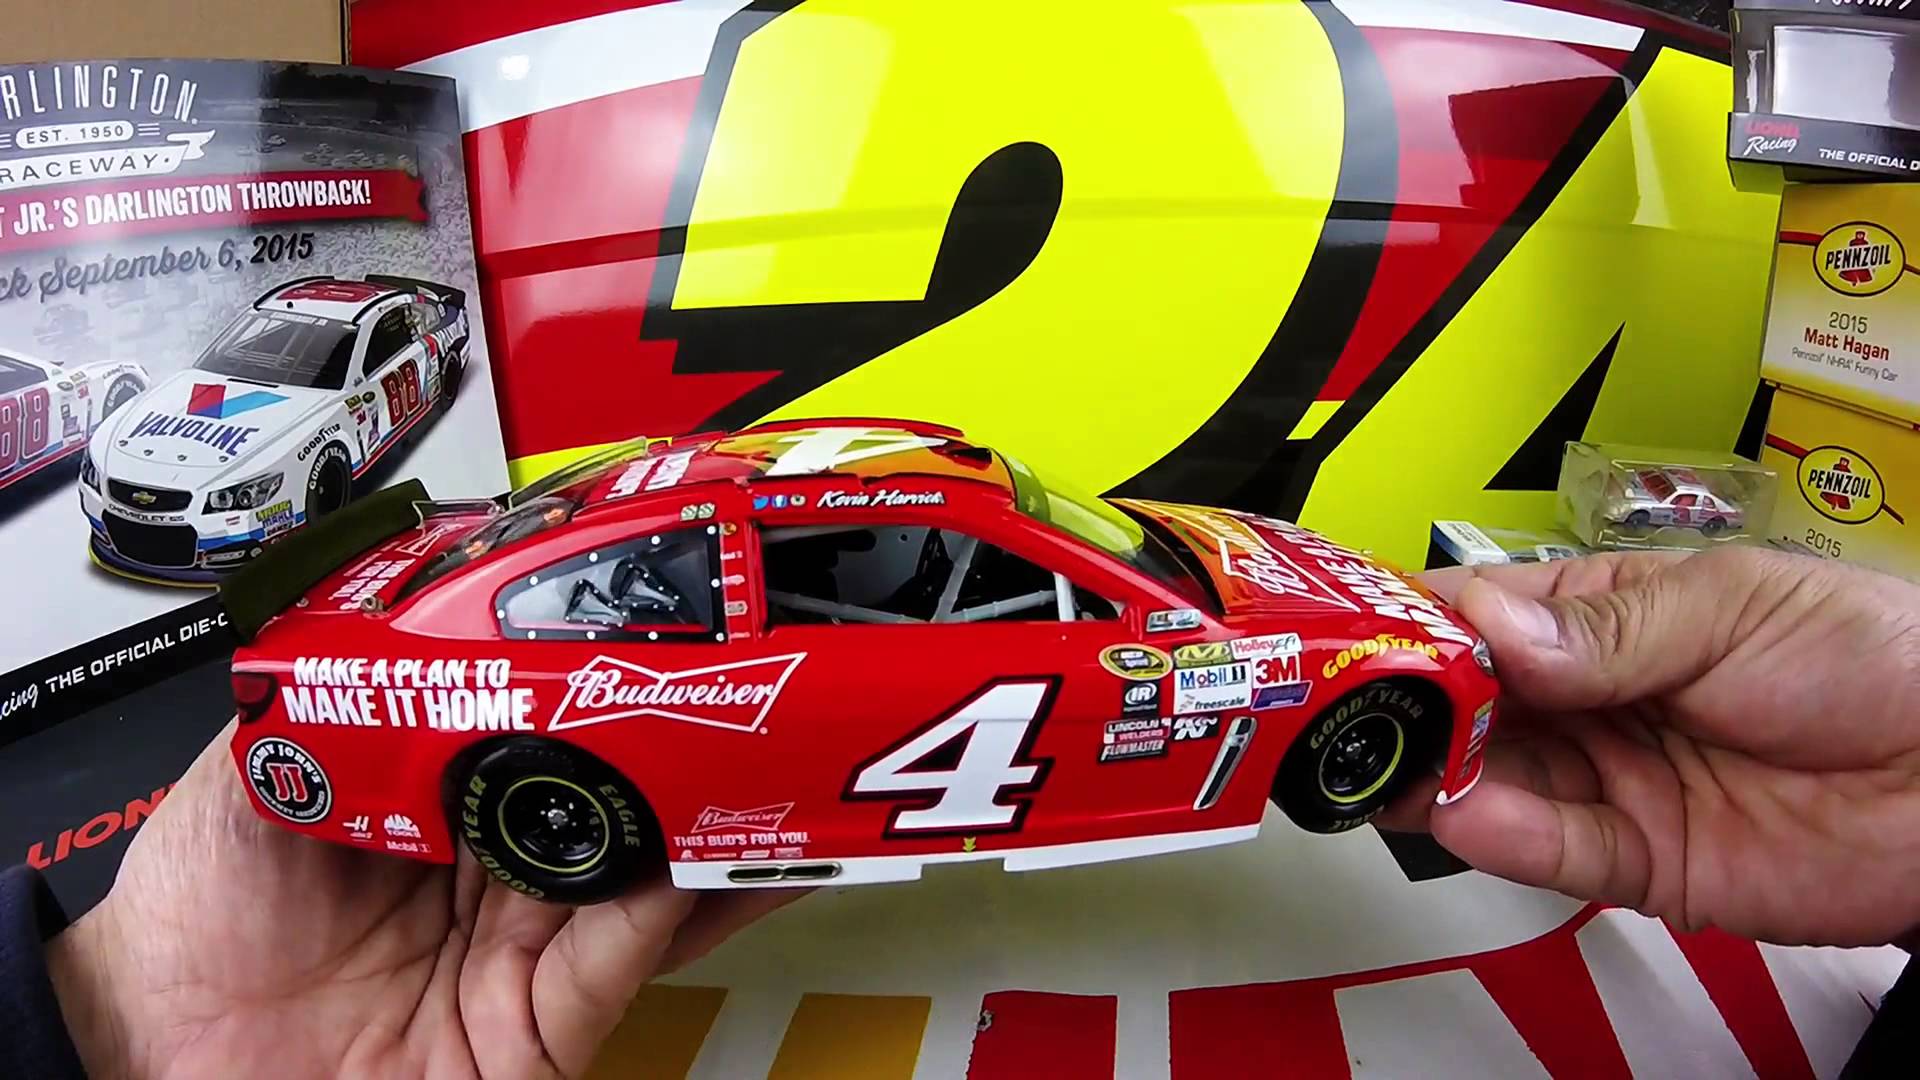 Unbxoing the 2015 Kevin Harvick Make a Plan 1/24 NASCAR Diecast